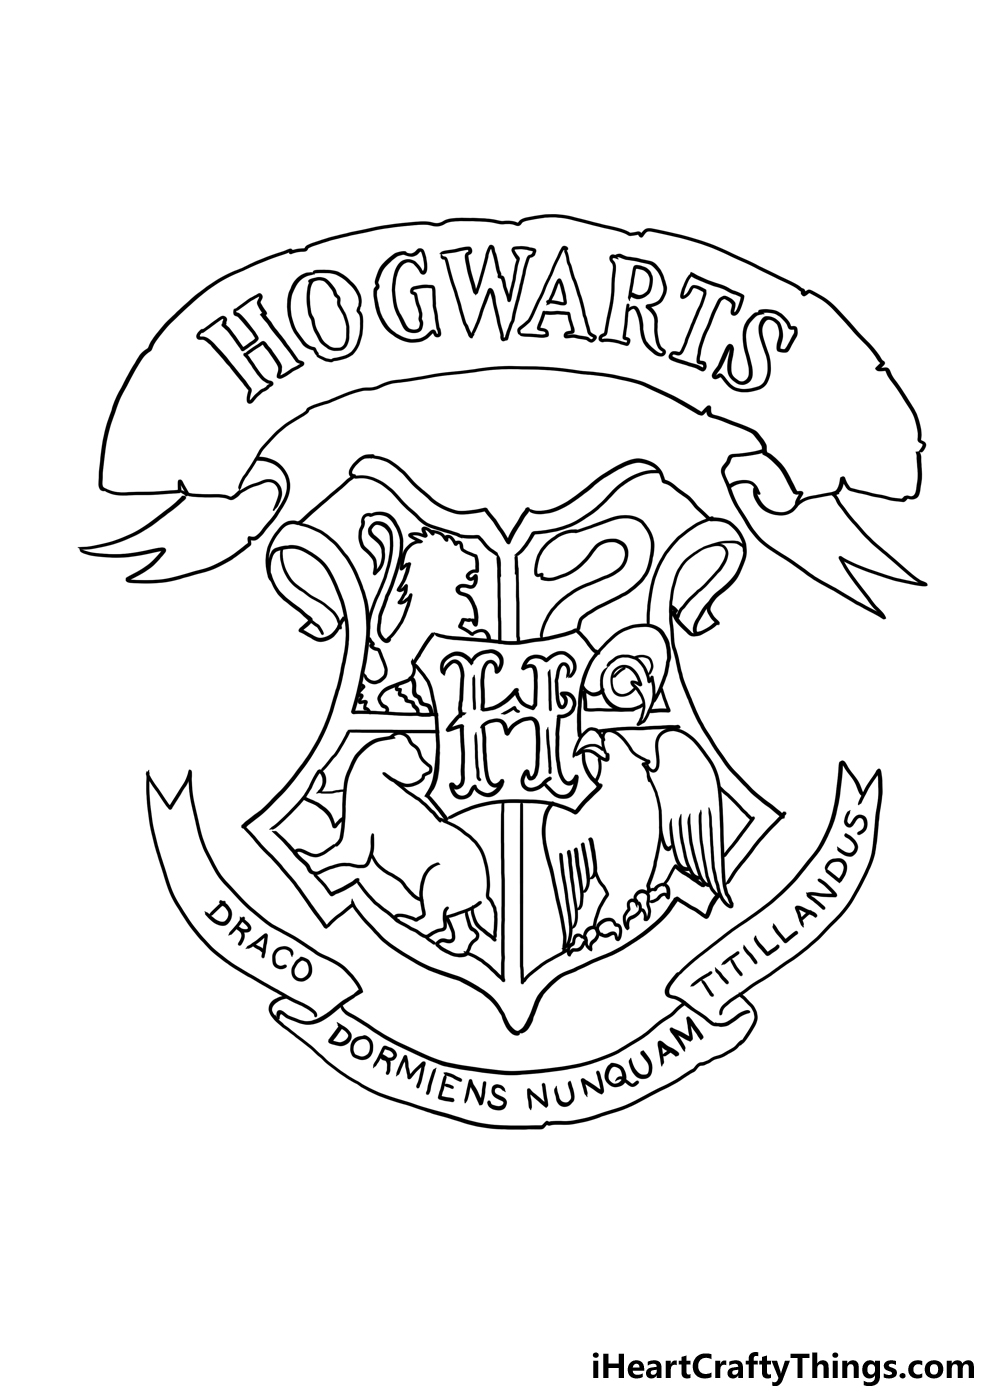 How to Draw the Hogwarts Crest step 4